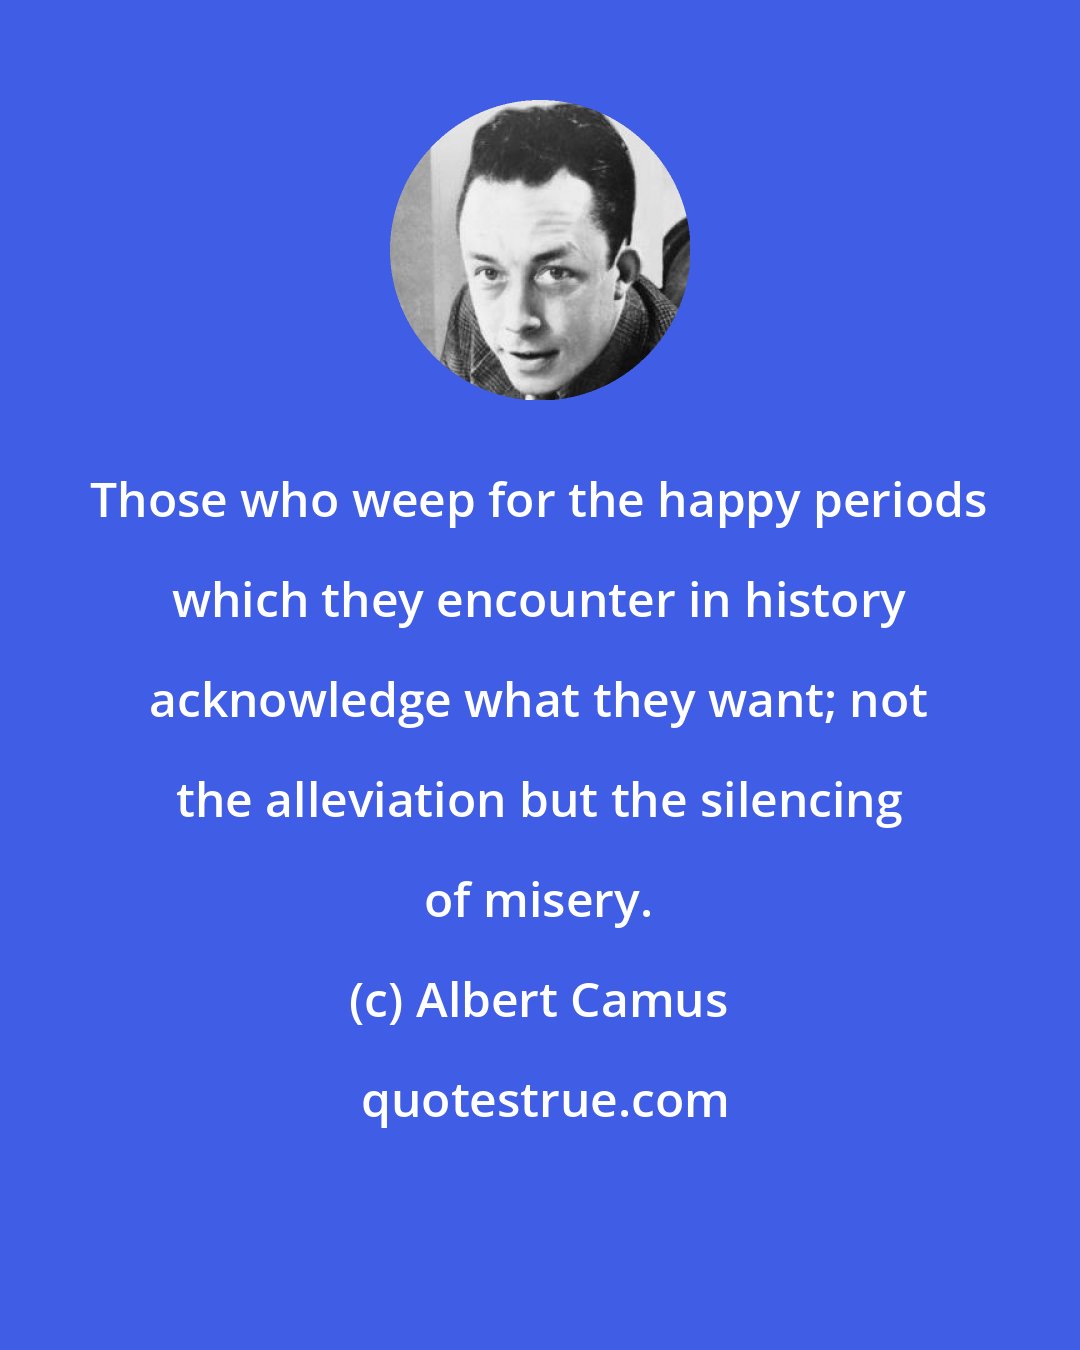 Albert Camus: Those who weep for the happy periods which they encounter in history acknowledge what they want; not the alleviation but the silencing of misery.